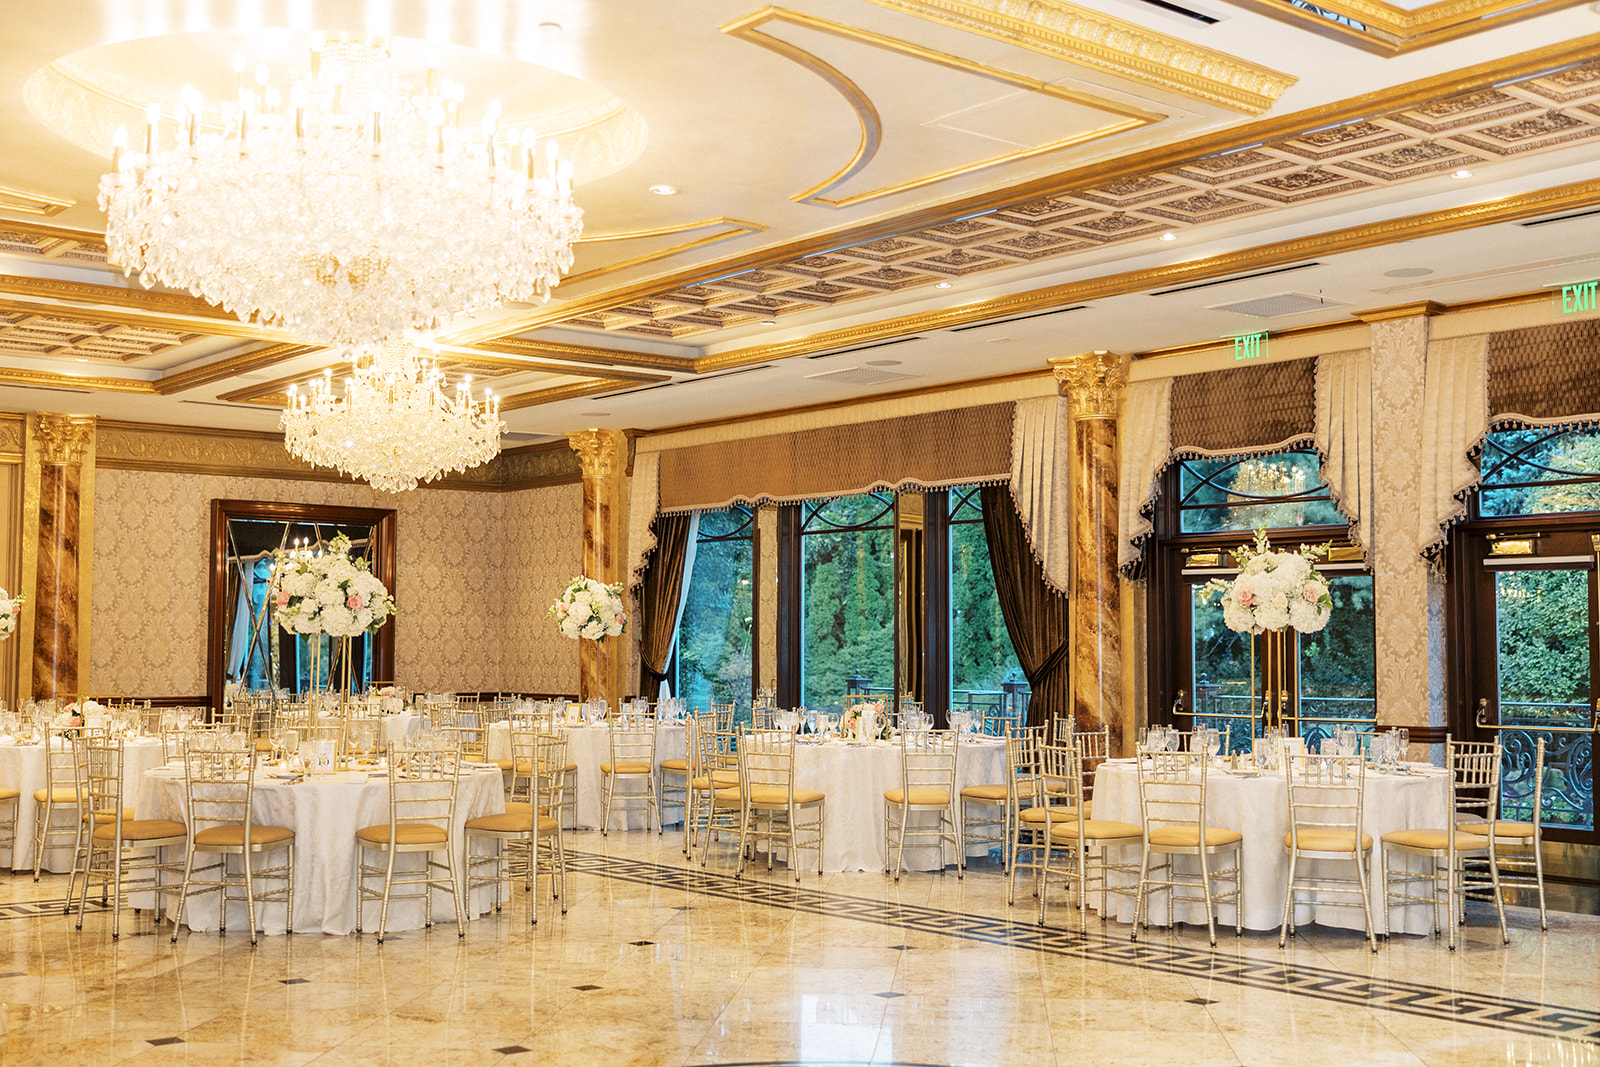 A look into the ornate Seasons Catering Wedding reception hall with tables set up and crystal chandeliers